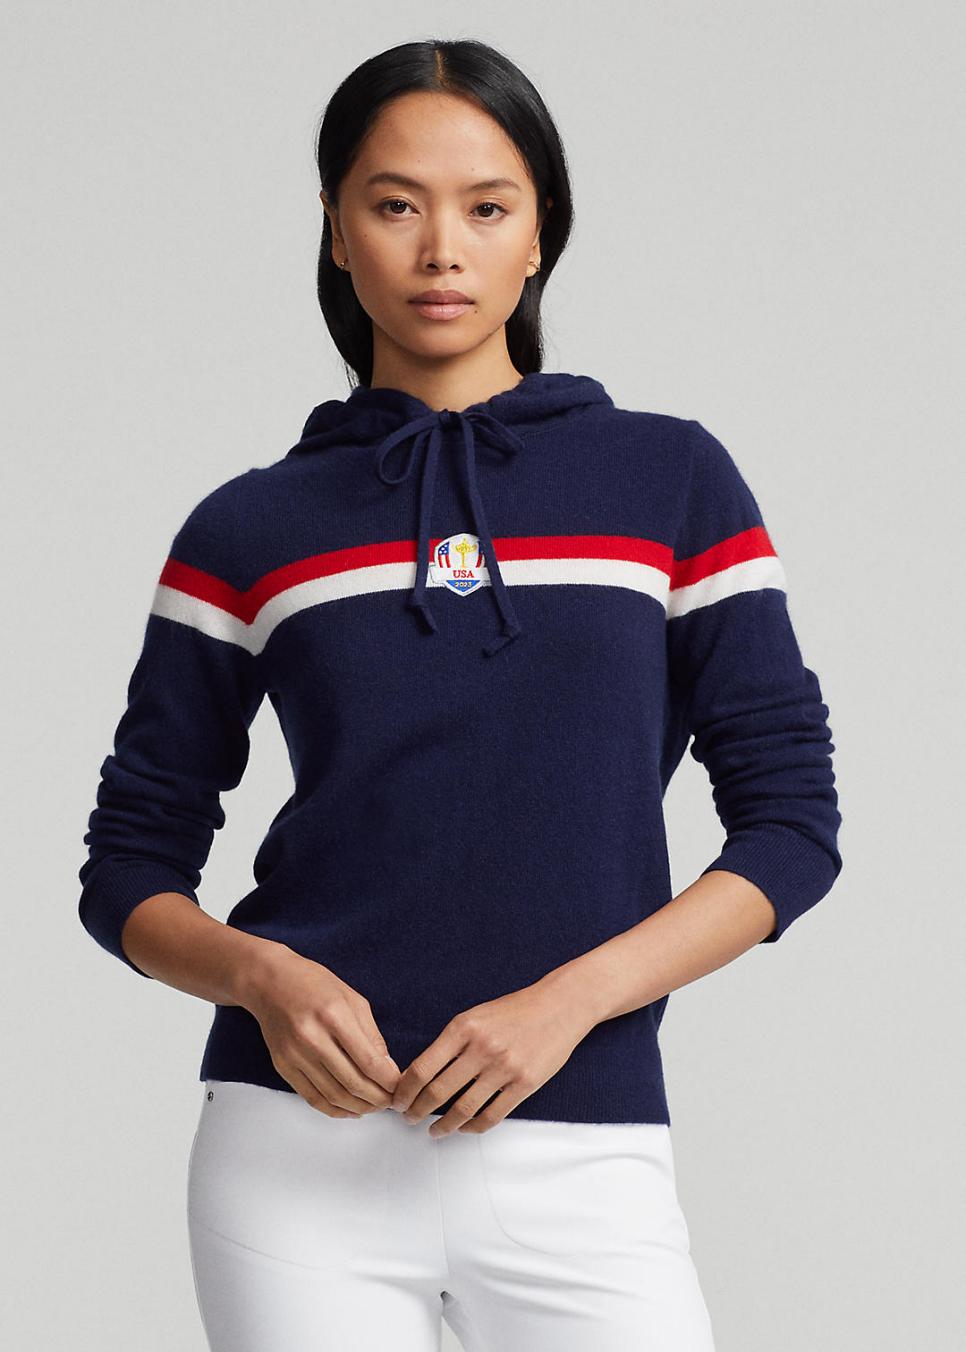 rx-rlxrlx-womens-us-ryder-cup-cashmere-hooded-sweater.jpeg